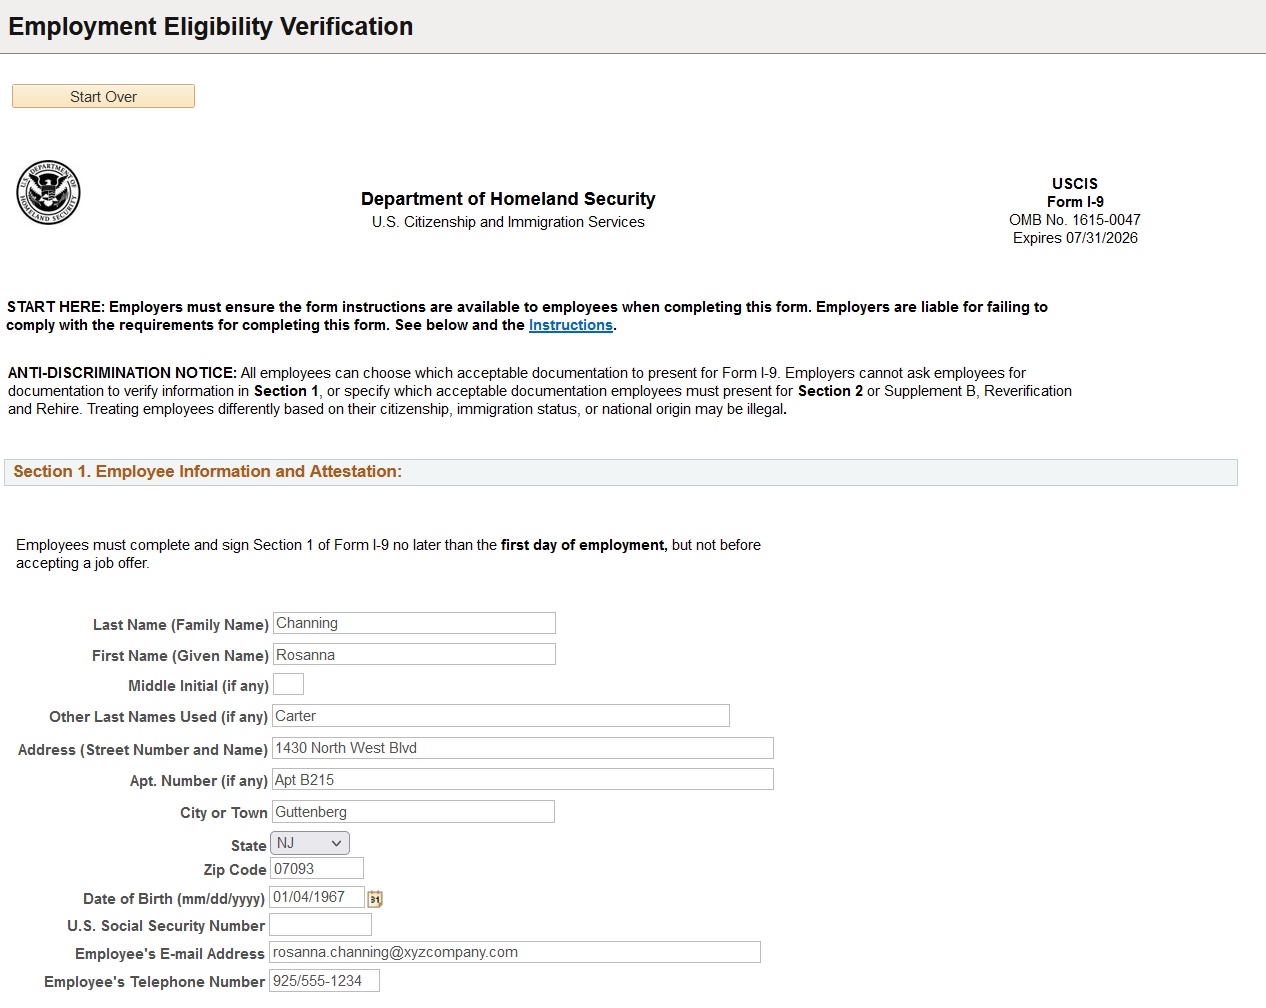 Employment Eligibility Verification page, Section 1 (1 of 3)